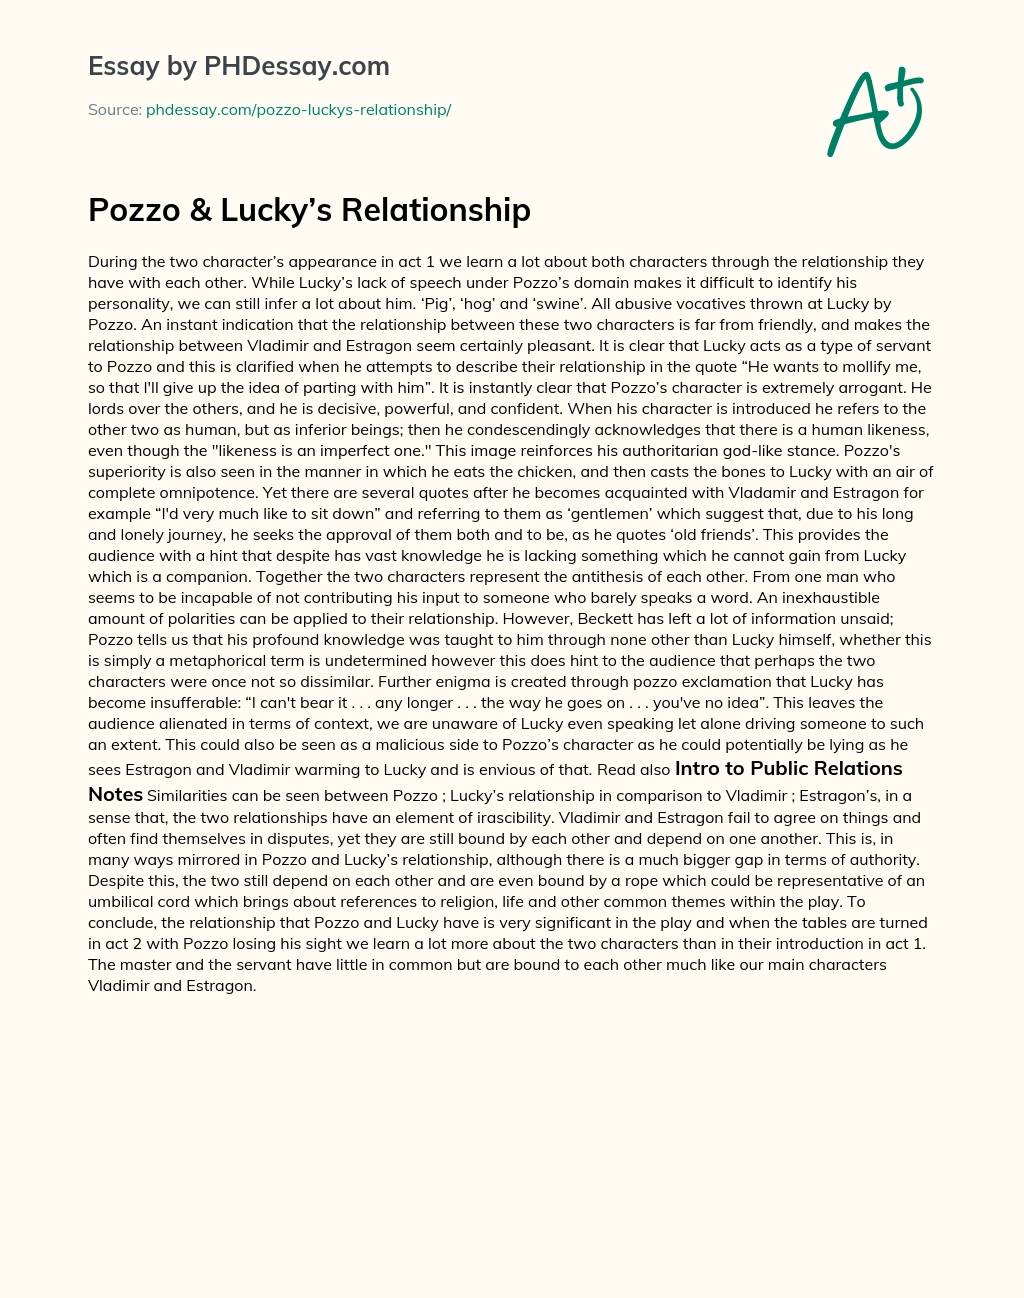 Pozzo & Lucky’s Relationship essay